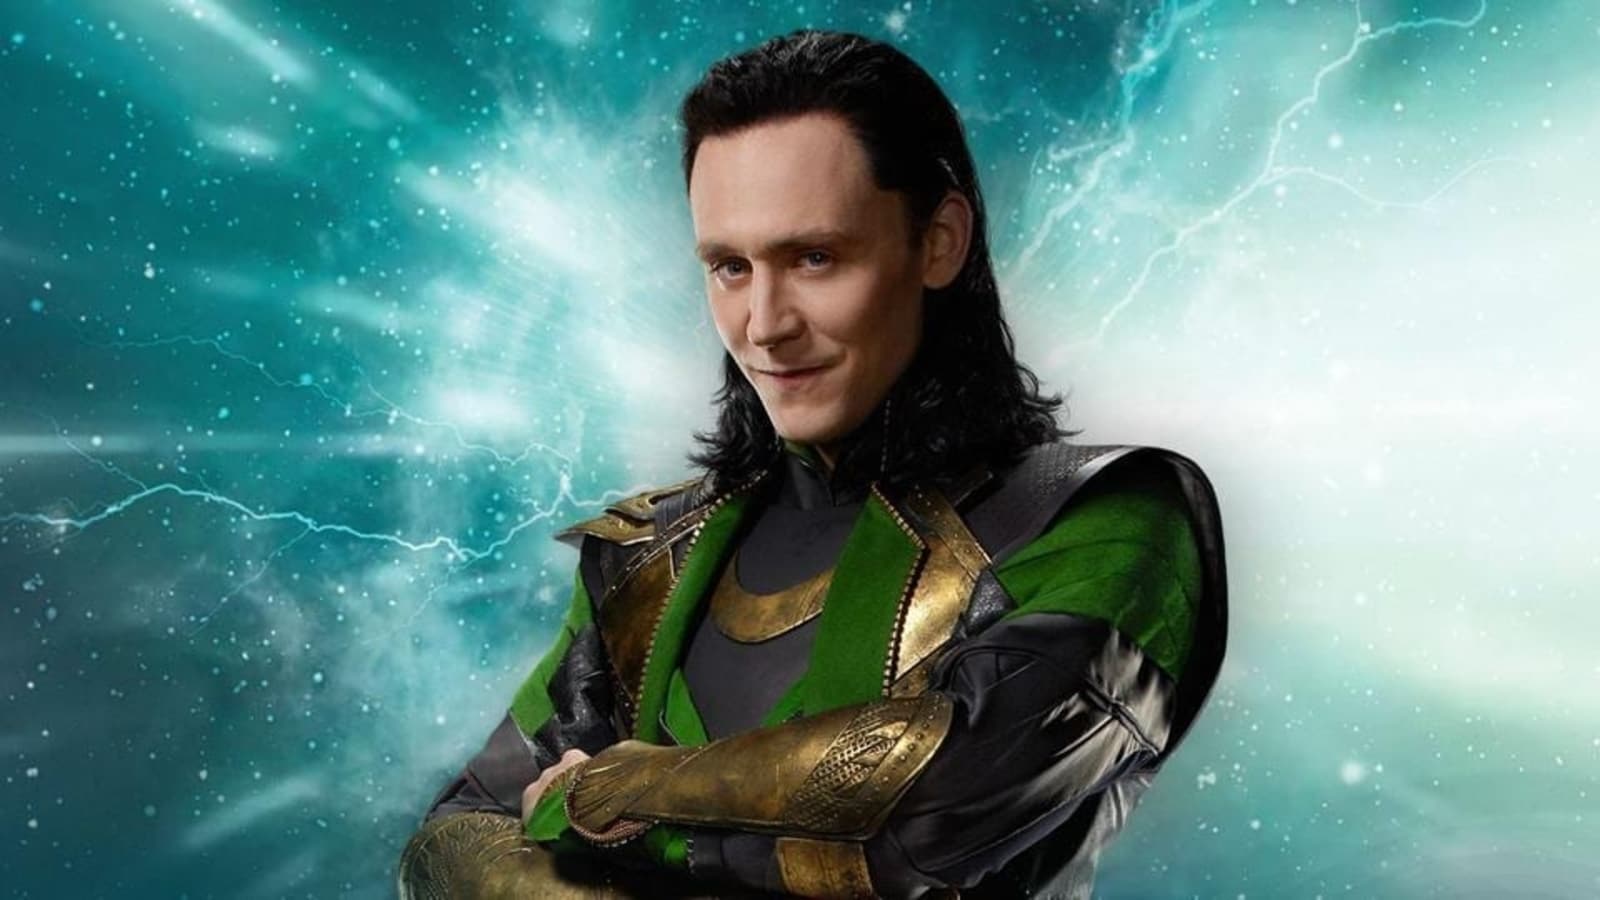 Tom Hiddleston on Loki's gender fluidity: 'He's been a character you could never put in a box'